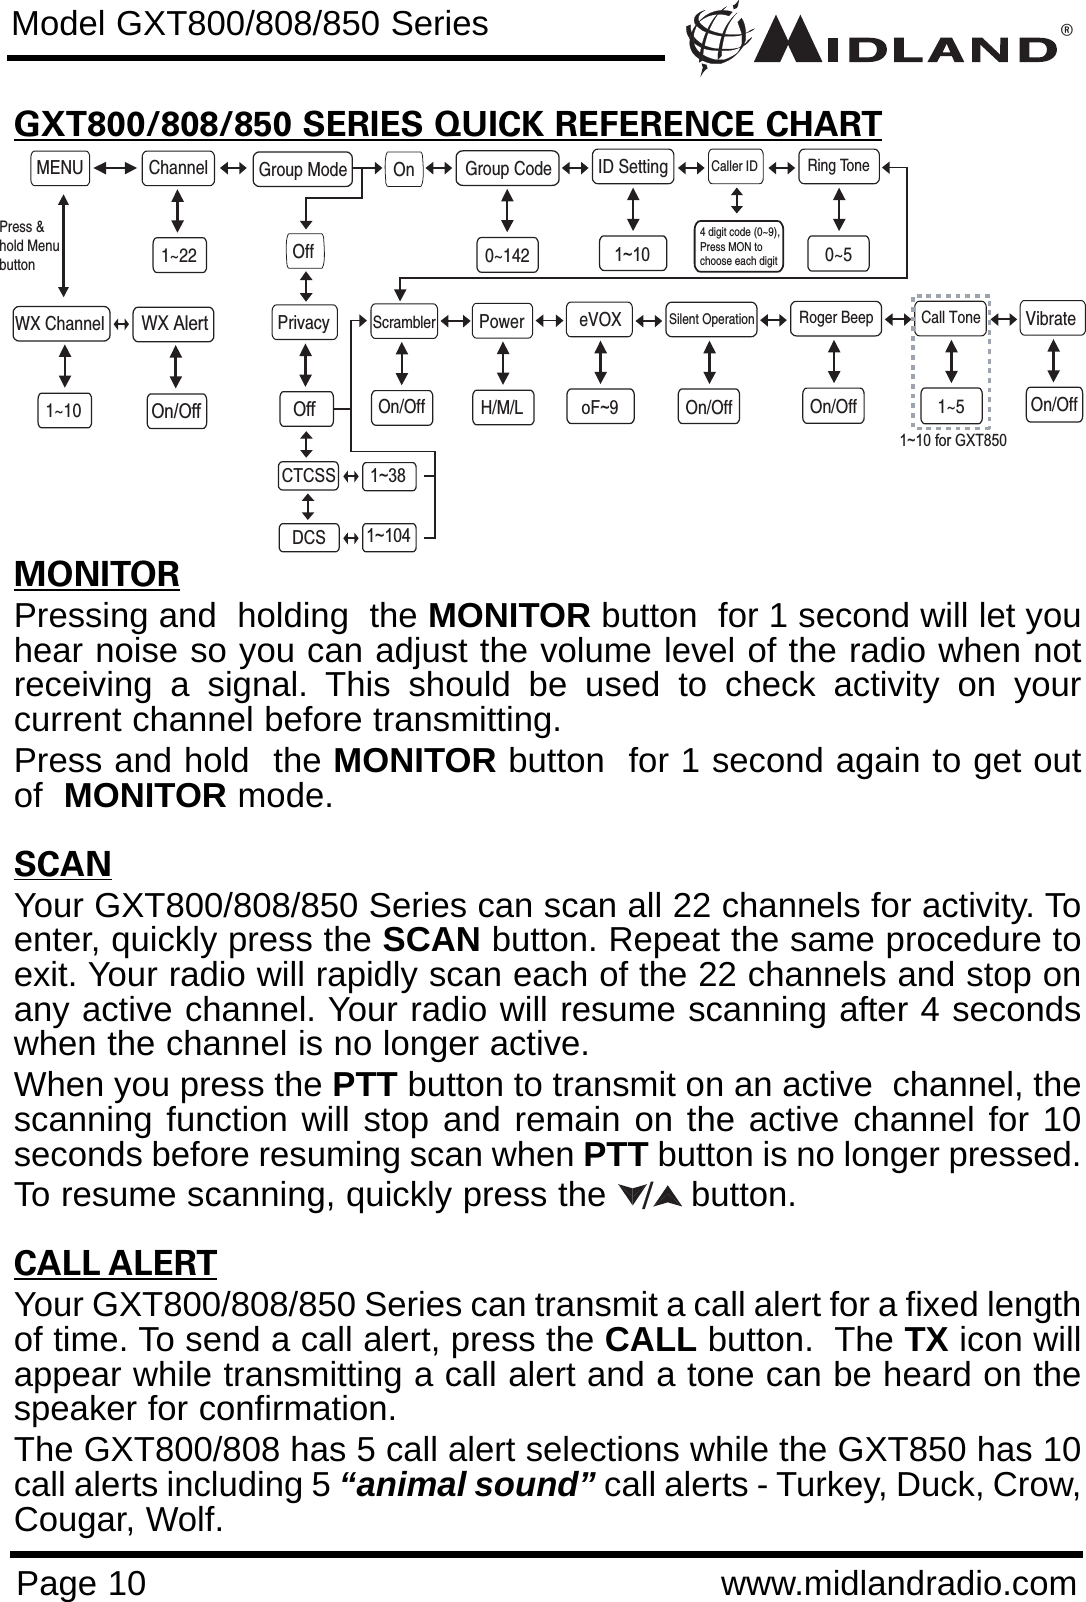 ®Page 10 www.midlandradio.comGXT800/808/850 SERIES QUICK REFERENCE CHARTMONITORPressing and  holding  the MONITOR button  for 1 second will let youhear noise so you can adjust the volume level of the radio when notreceiving a signal. This should be used to check activity on yourcurrent channel before transmitting. Press and hold  the MONITOR button  for 1 second again to get outof  MONITOR mode.SCANYour GXT800/808/850 Series can scan all 22 channels for activity. Toenter, quickly press the SCAN button. Repeat the same procedure toexit. Your radio will rapidly scan each of the 22 channels and stop onany active channel. Your radio will resume scanning after 4 secondswhen the channel is no longer active.When you press the PTT button to transmit on an active  channel, thescanning function will stop and remain on the active channel for 10seconds before resuming scan when PTT button is no longer pressed. To resume scanning, quickly press the  button.CALL ALERTYour GXT800/808/850 Series can transmit a call alert for a fixed lengthof time. To send a call alert, press the CALL button.  The TX icon willappear while transmitting a call alert and a tone can be heard on thespeaker for confirmation. The GXT800/808 has 5 call alert selections while the GXT850 has 10call alerts including 5 “animal sound” call alerts - Turkey, Duck, Crow,Cougar, Wolf.Model GXT800/808/850 SeriesMENU ChanneleVOX1~22Privacy Roger BeepOn/OffScrambler Call Tone1~5VibrateOn/OffWX Channel1~10Press &amp;hold MenubuttonSilent OperationOn/OffoF~9OffCTCSSDCS1~381~104WX AlertOn/OffGroup Mode OnOffID SettingRing Tone0~5Group Code0~142Caller ID4 digit code (0~9), Press MON to choose each digit1~101~10 for GXT850PowerH/M/LOn/Off/